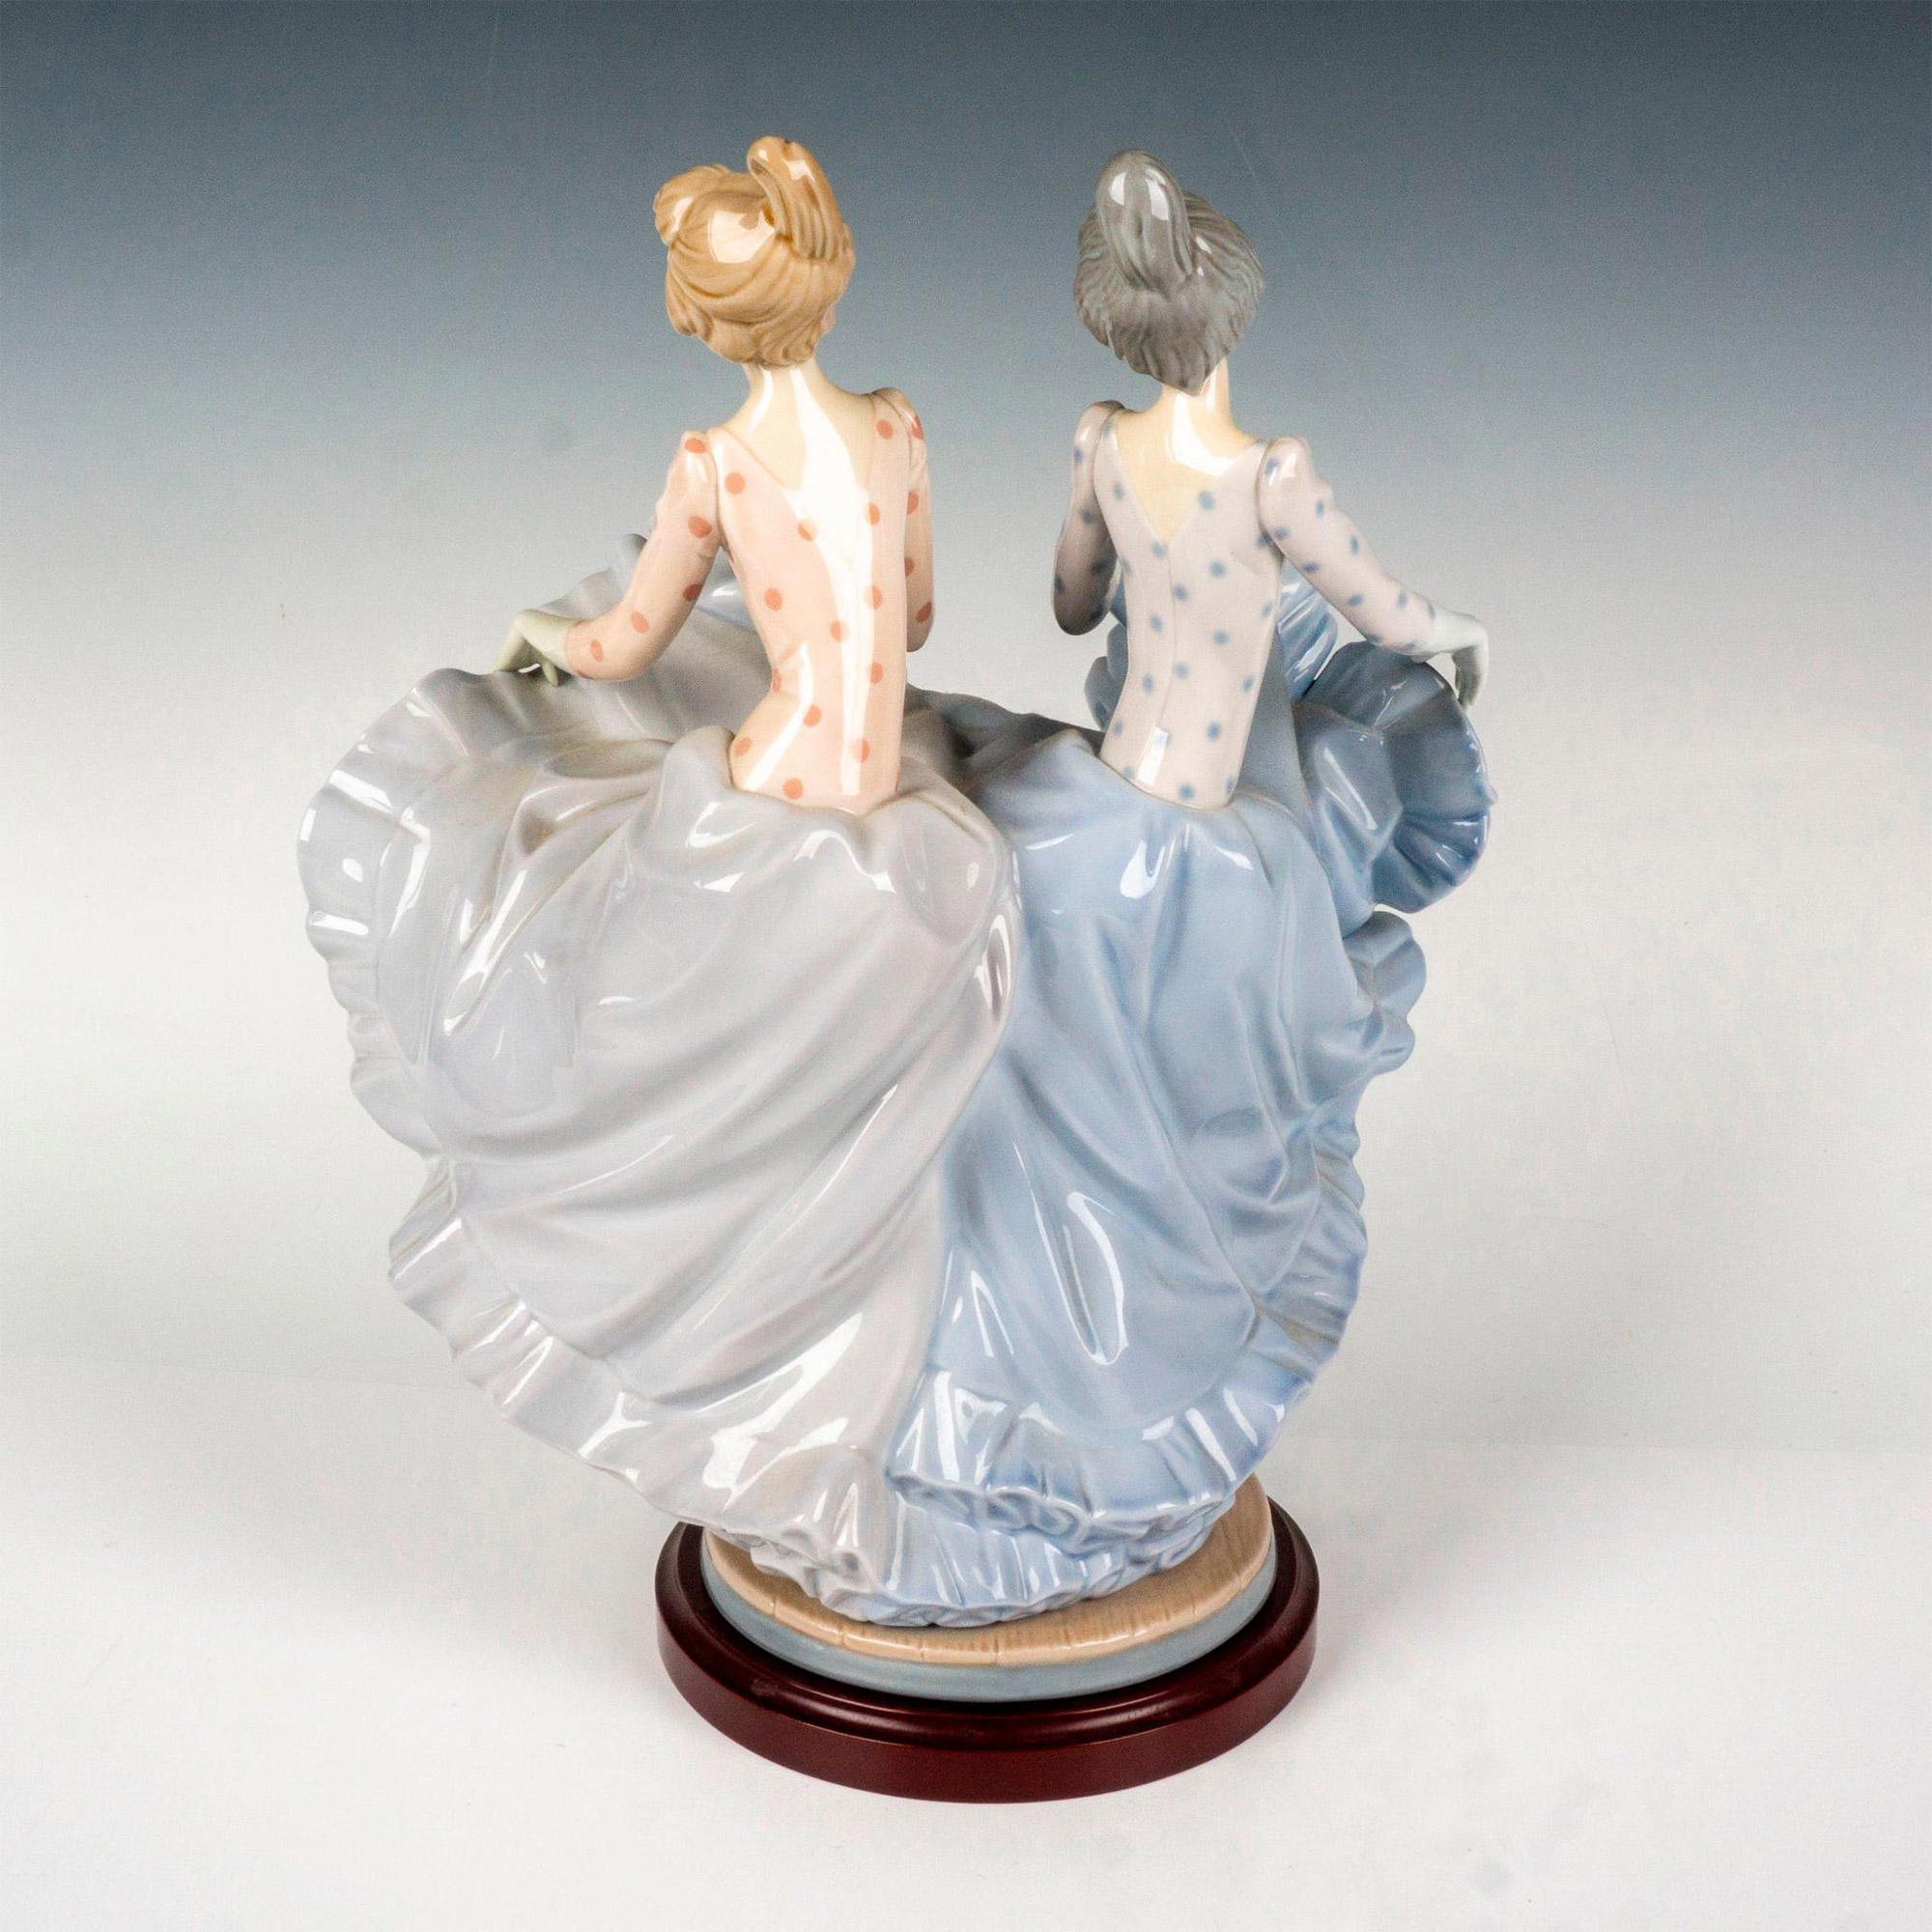 Can-Can 1005370 + Base - Lladro Porcelain Figurine - Image 2 of 3